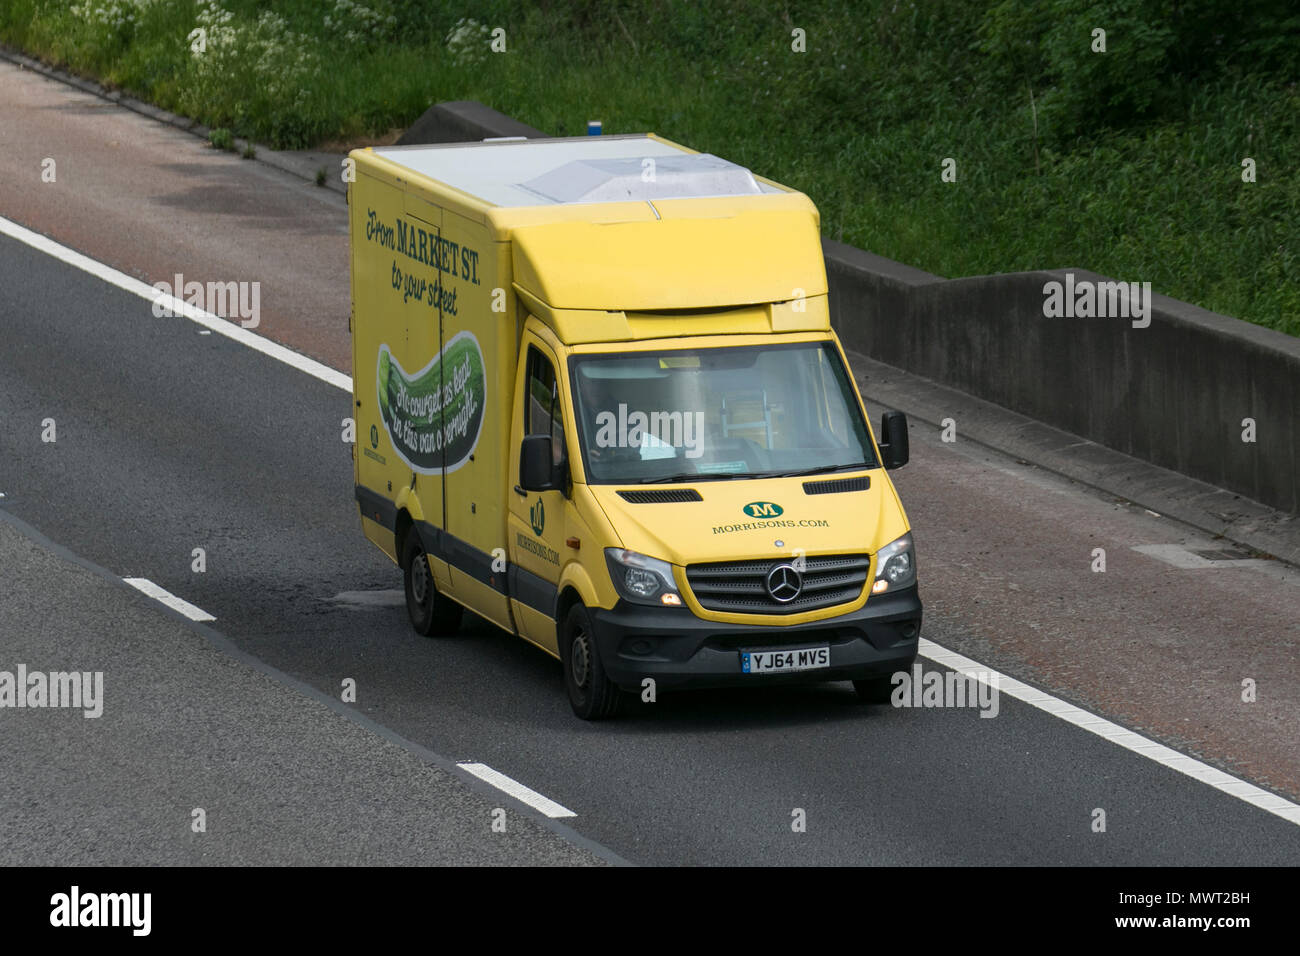 Ocado & Morrisons supermarket grocery delivery service food store vehicles; online delivery fleet delivering, groceries & household essentials in Liverpool, Merseyside, UK Stock Photo